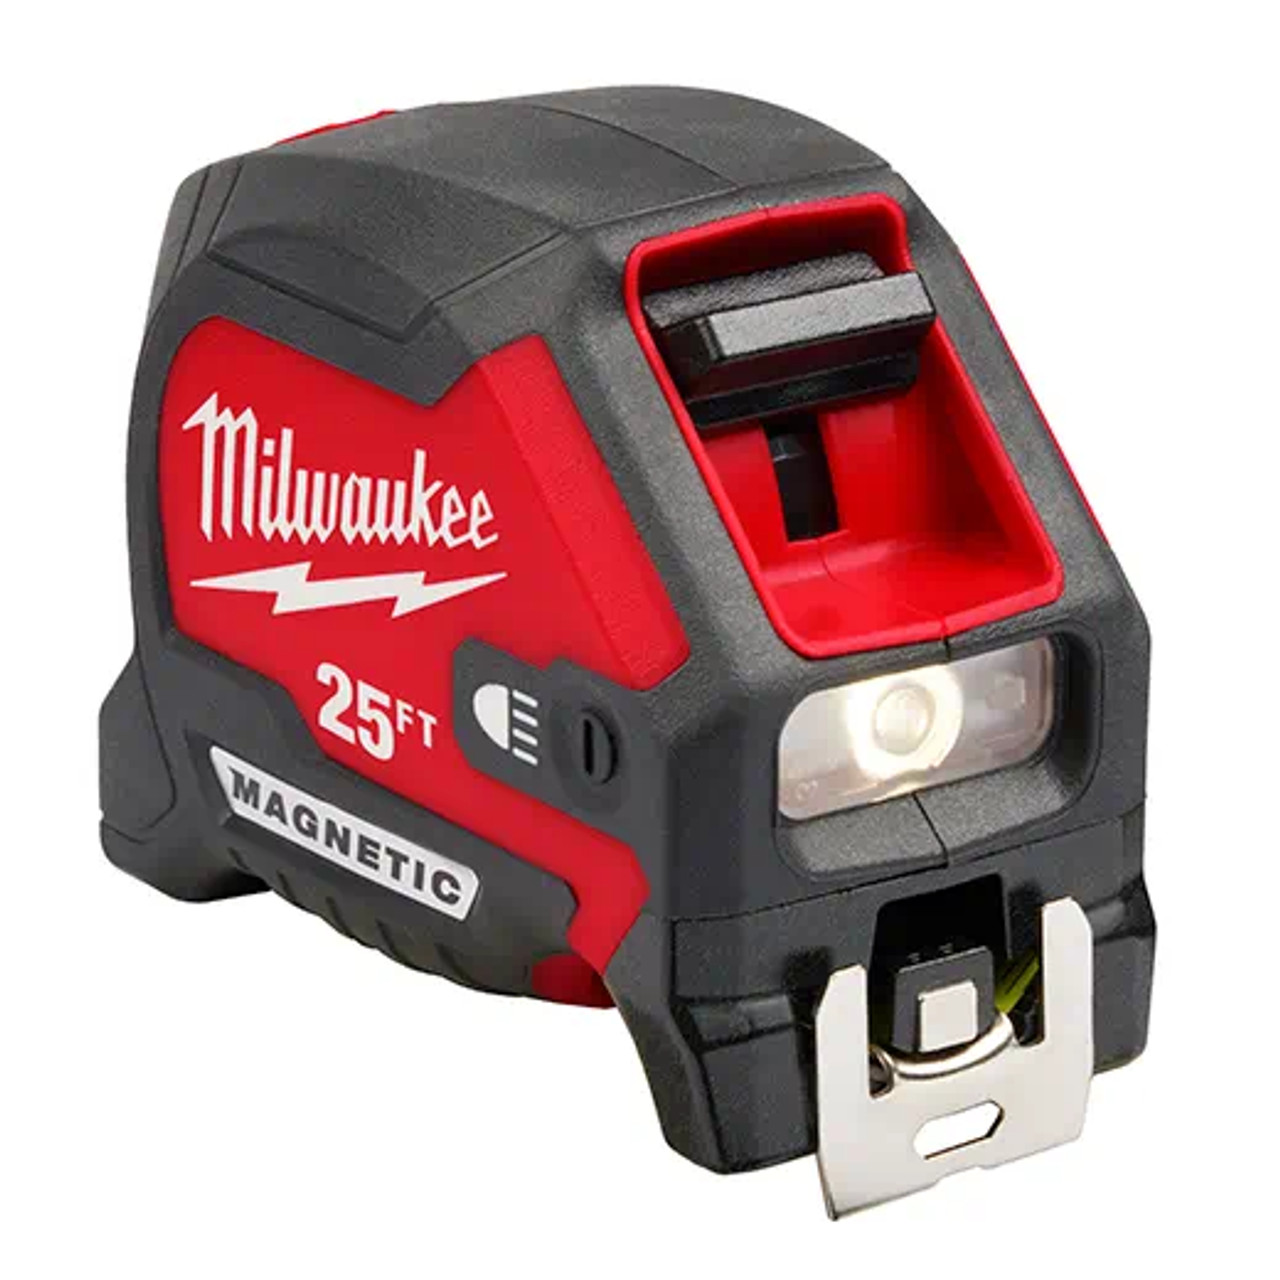 Milwaukee 8m Tape Mag Pro Tape Measure - Metric Only Free Pencil